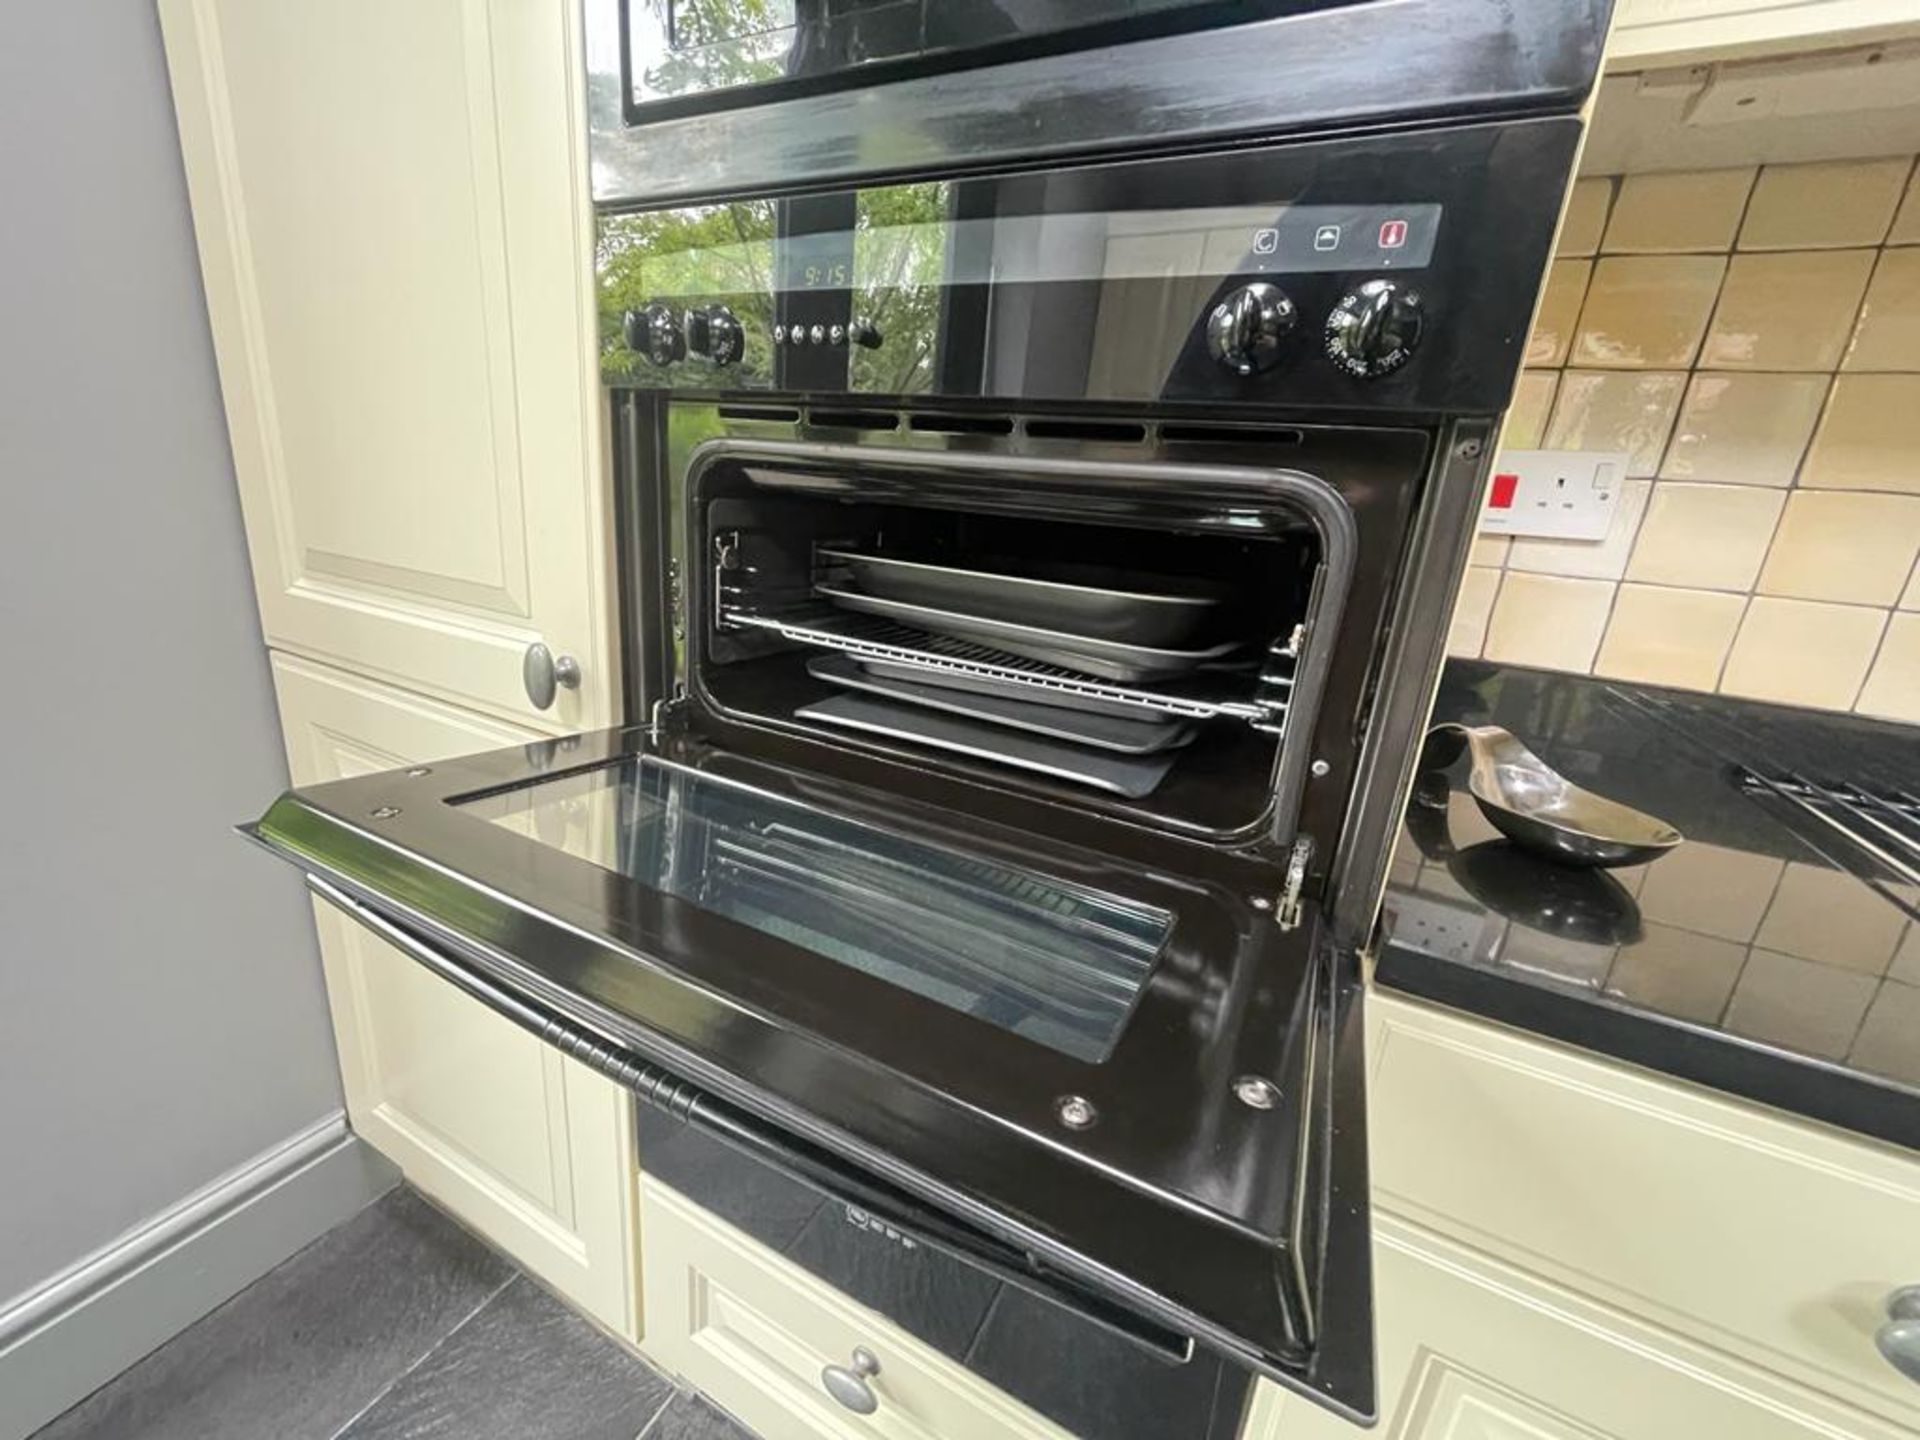 1 x Bespoke Keller Kitchen With Branded Appliances - From An Exclusive Property - No VAT On The - Image 49 of 127